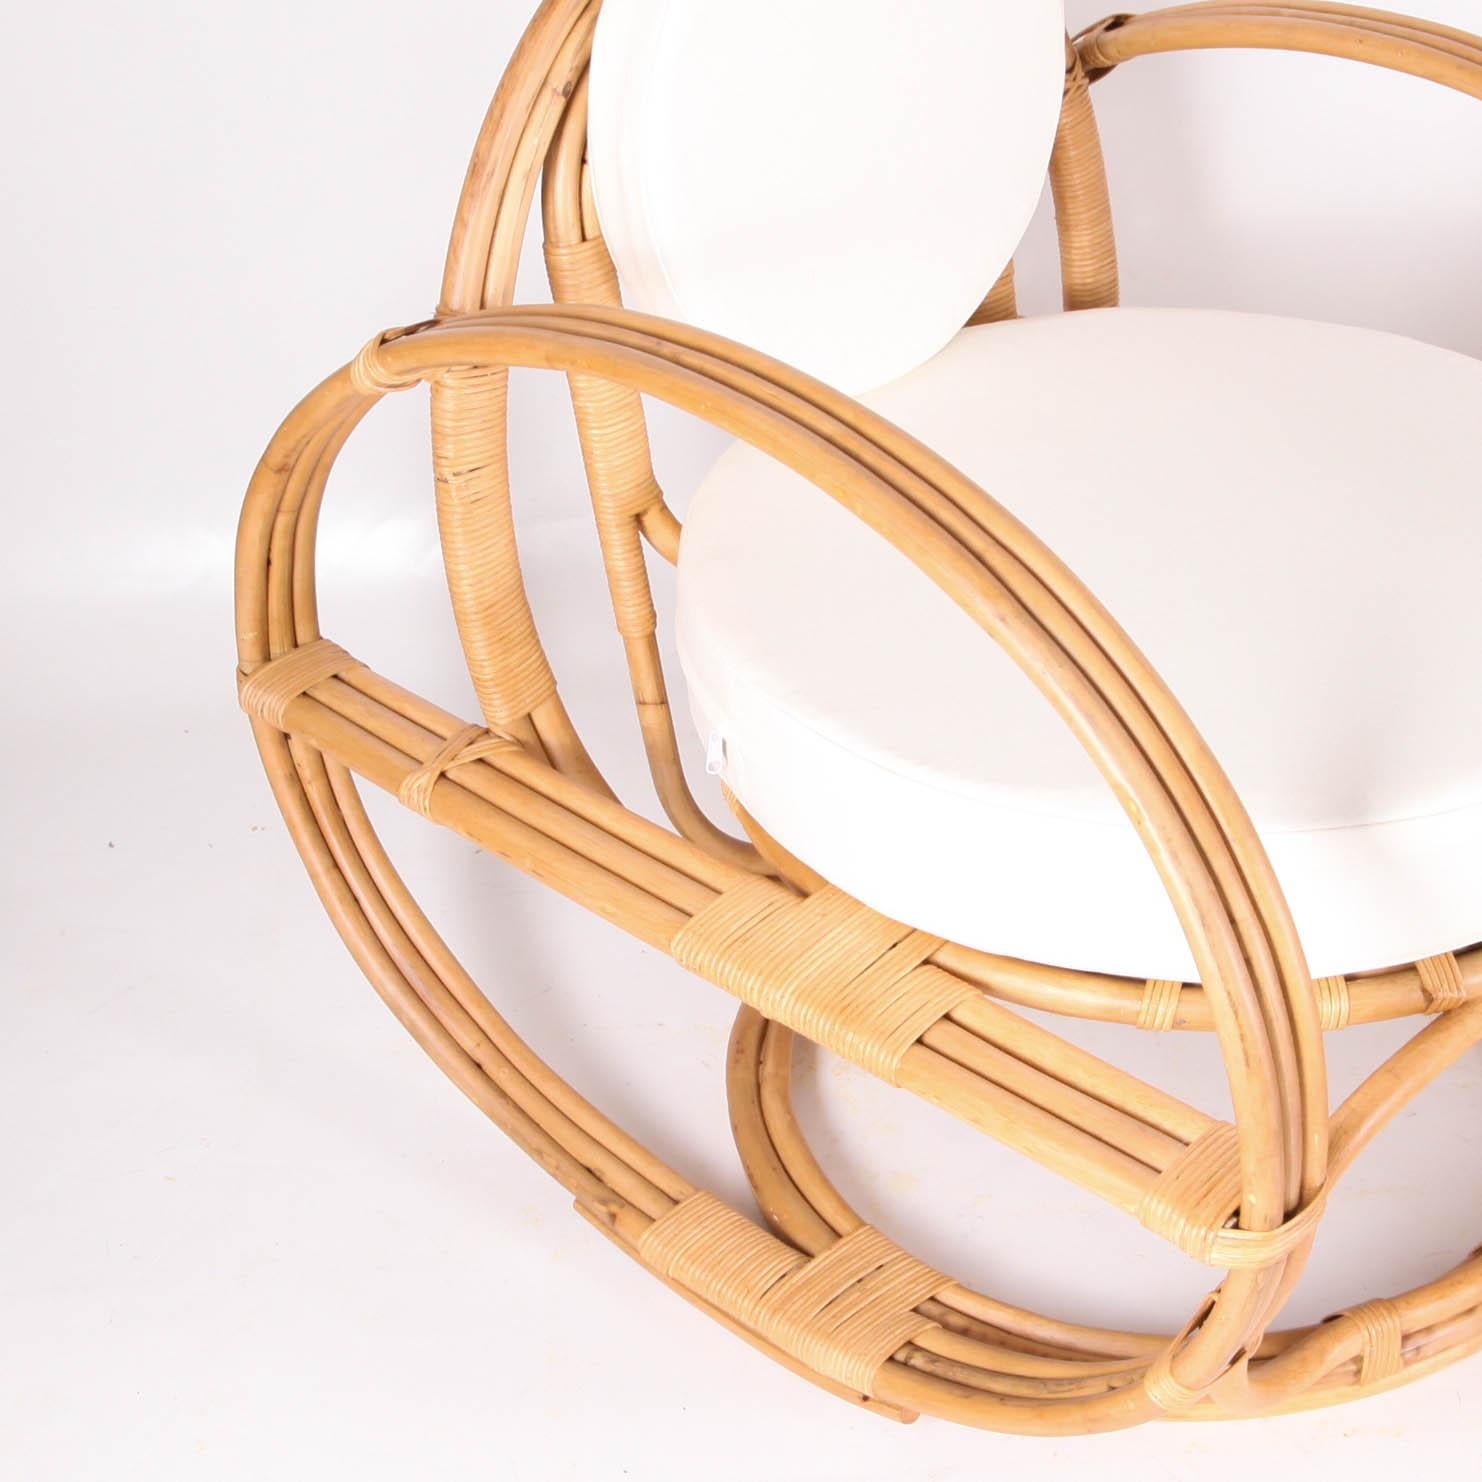 Contemporary Rattan Hoops Armchairs In Excellent Condition For Sale In Isle Sur Sorgue, FR